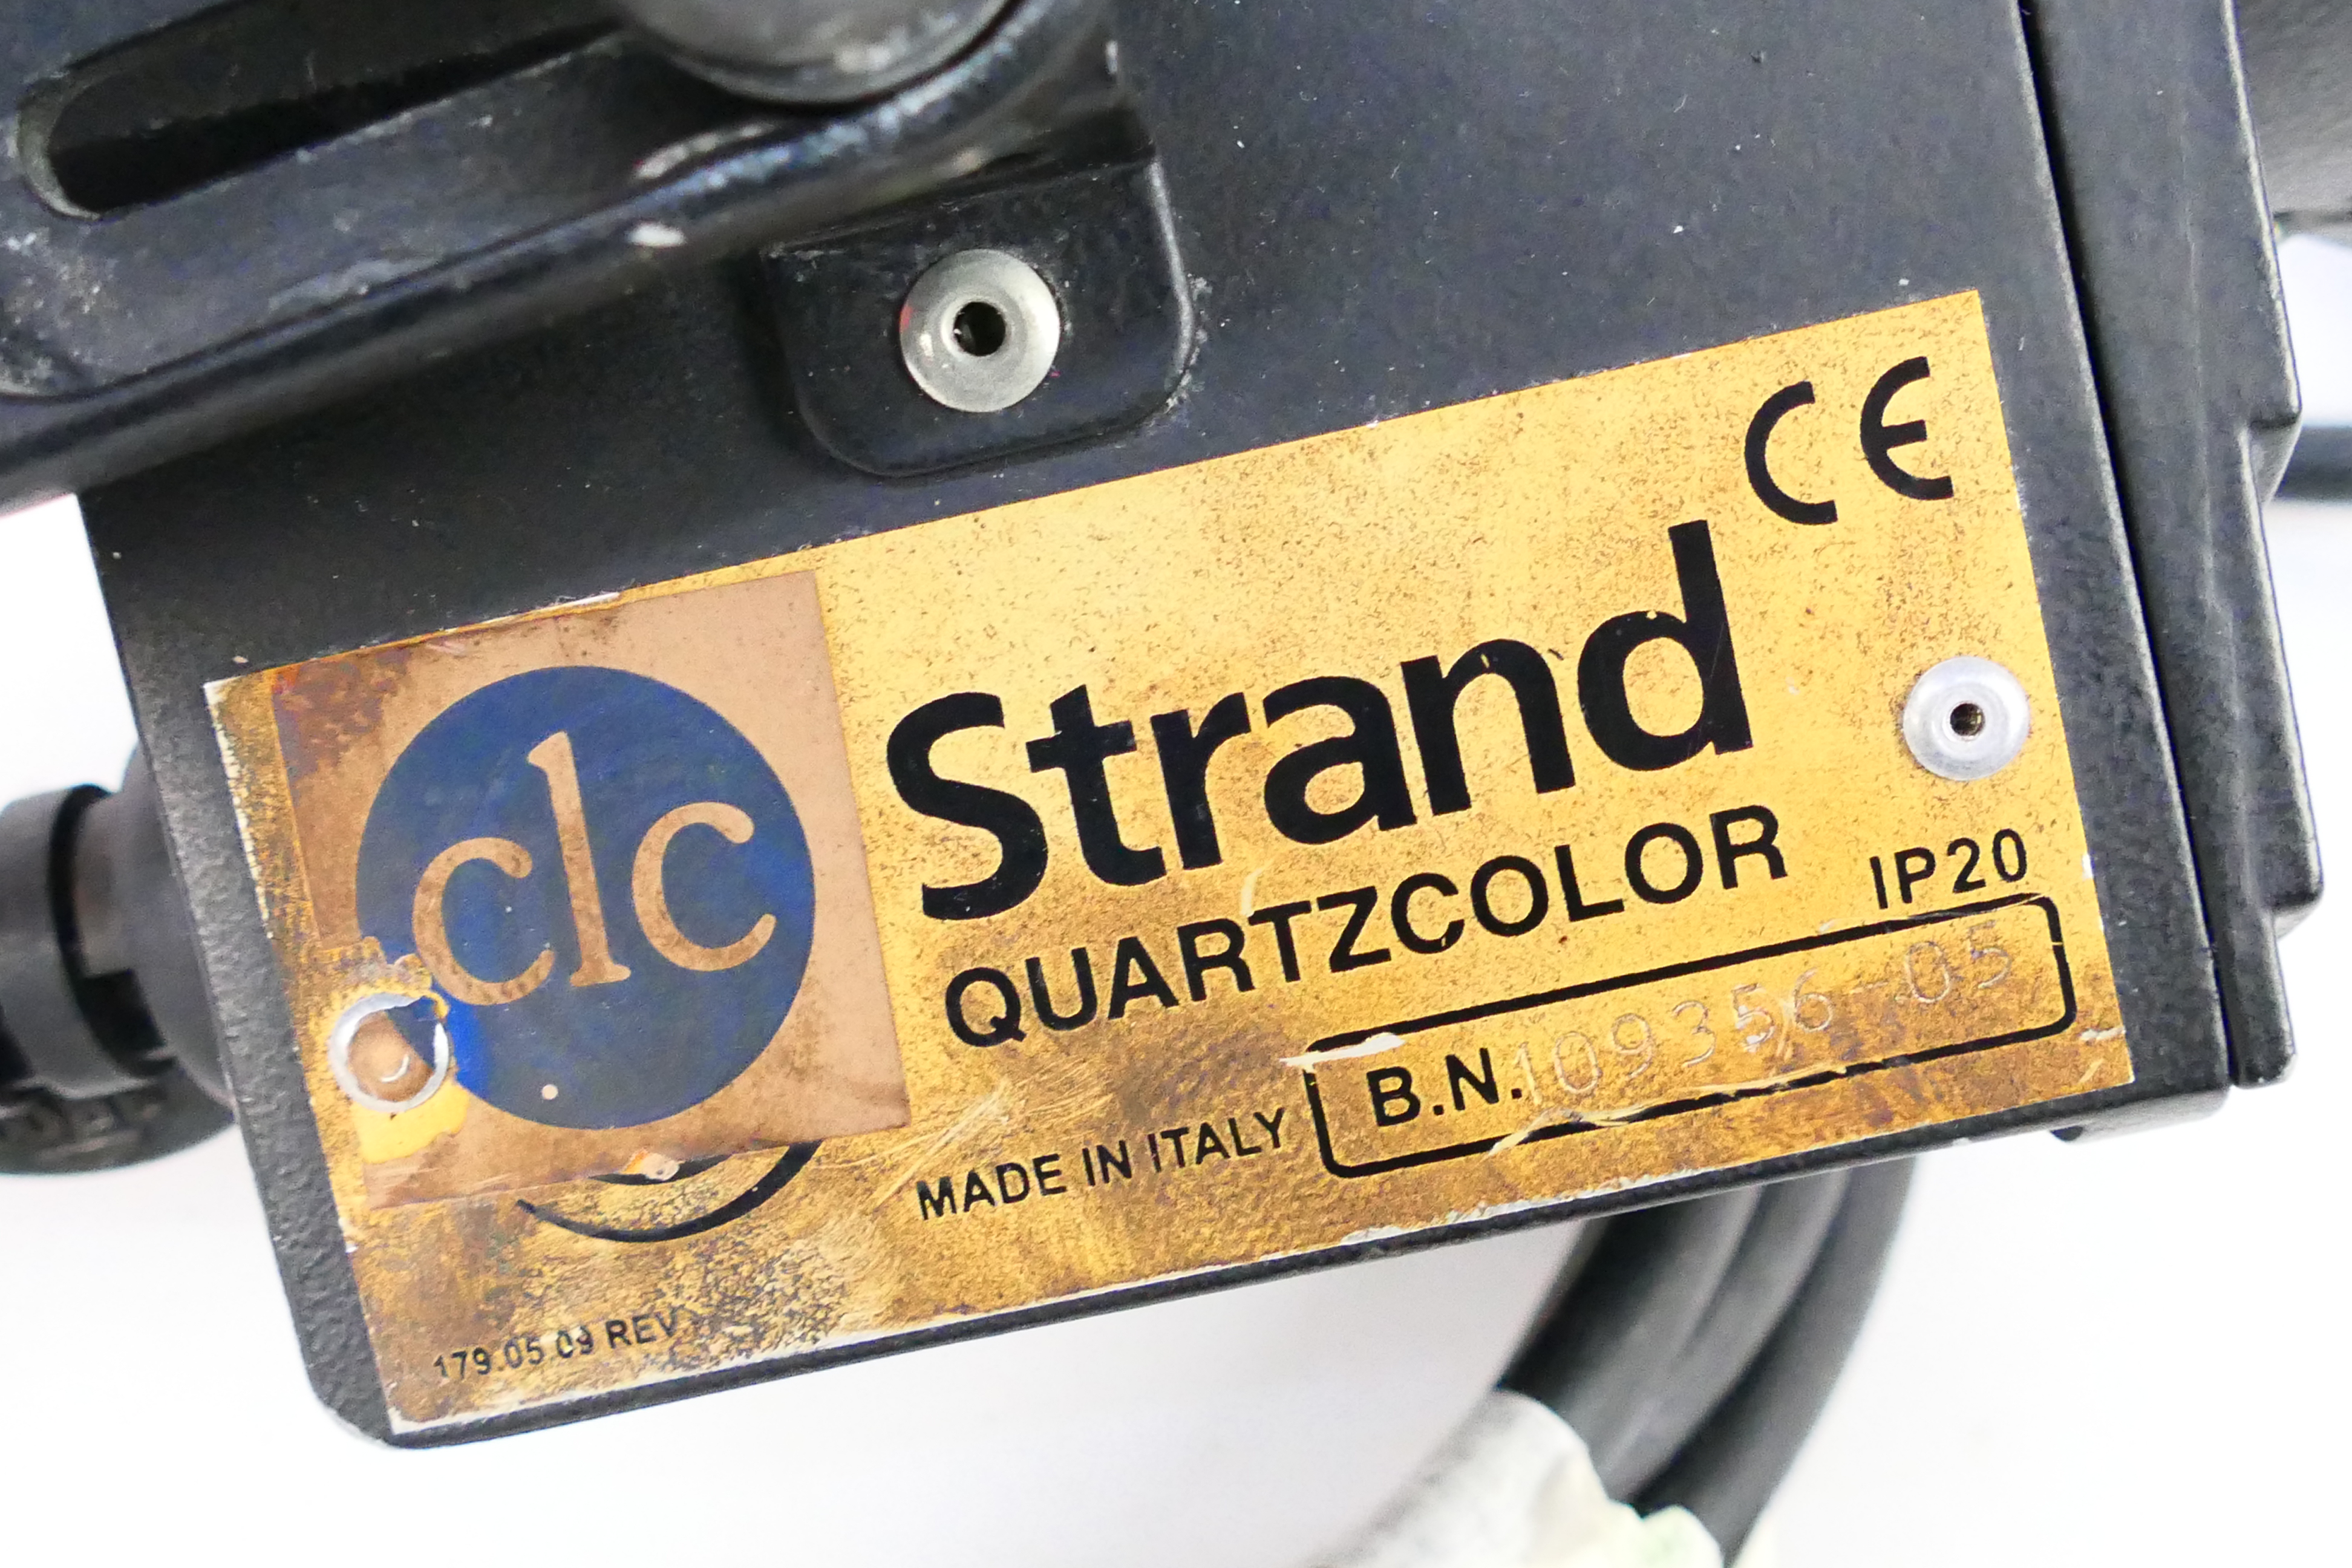 Vintage Photographic / Theatrical Lighting - A Strand Quartzcolor Bambino 500 light. - Image 3 of 4